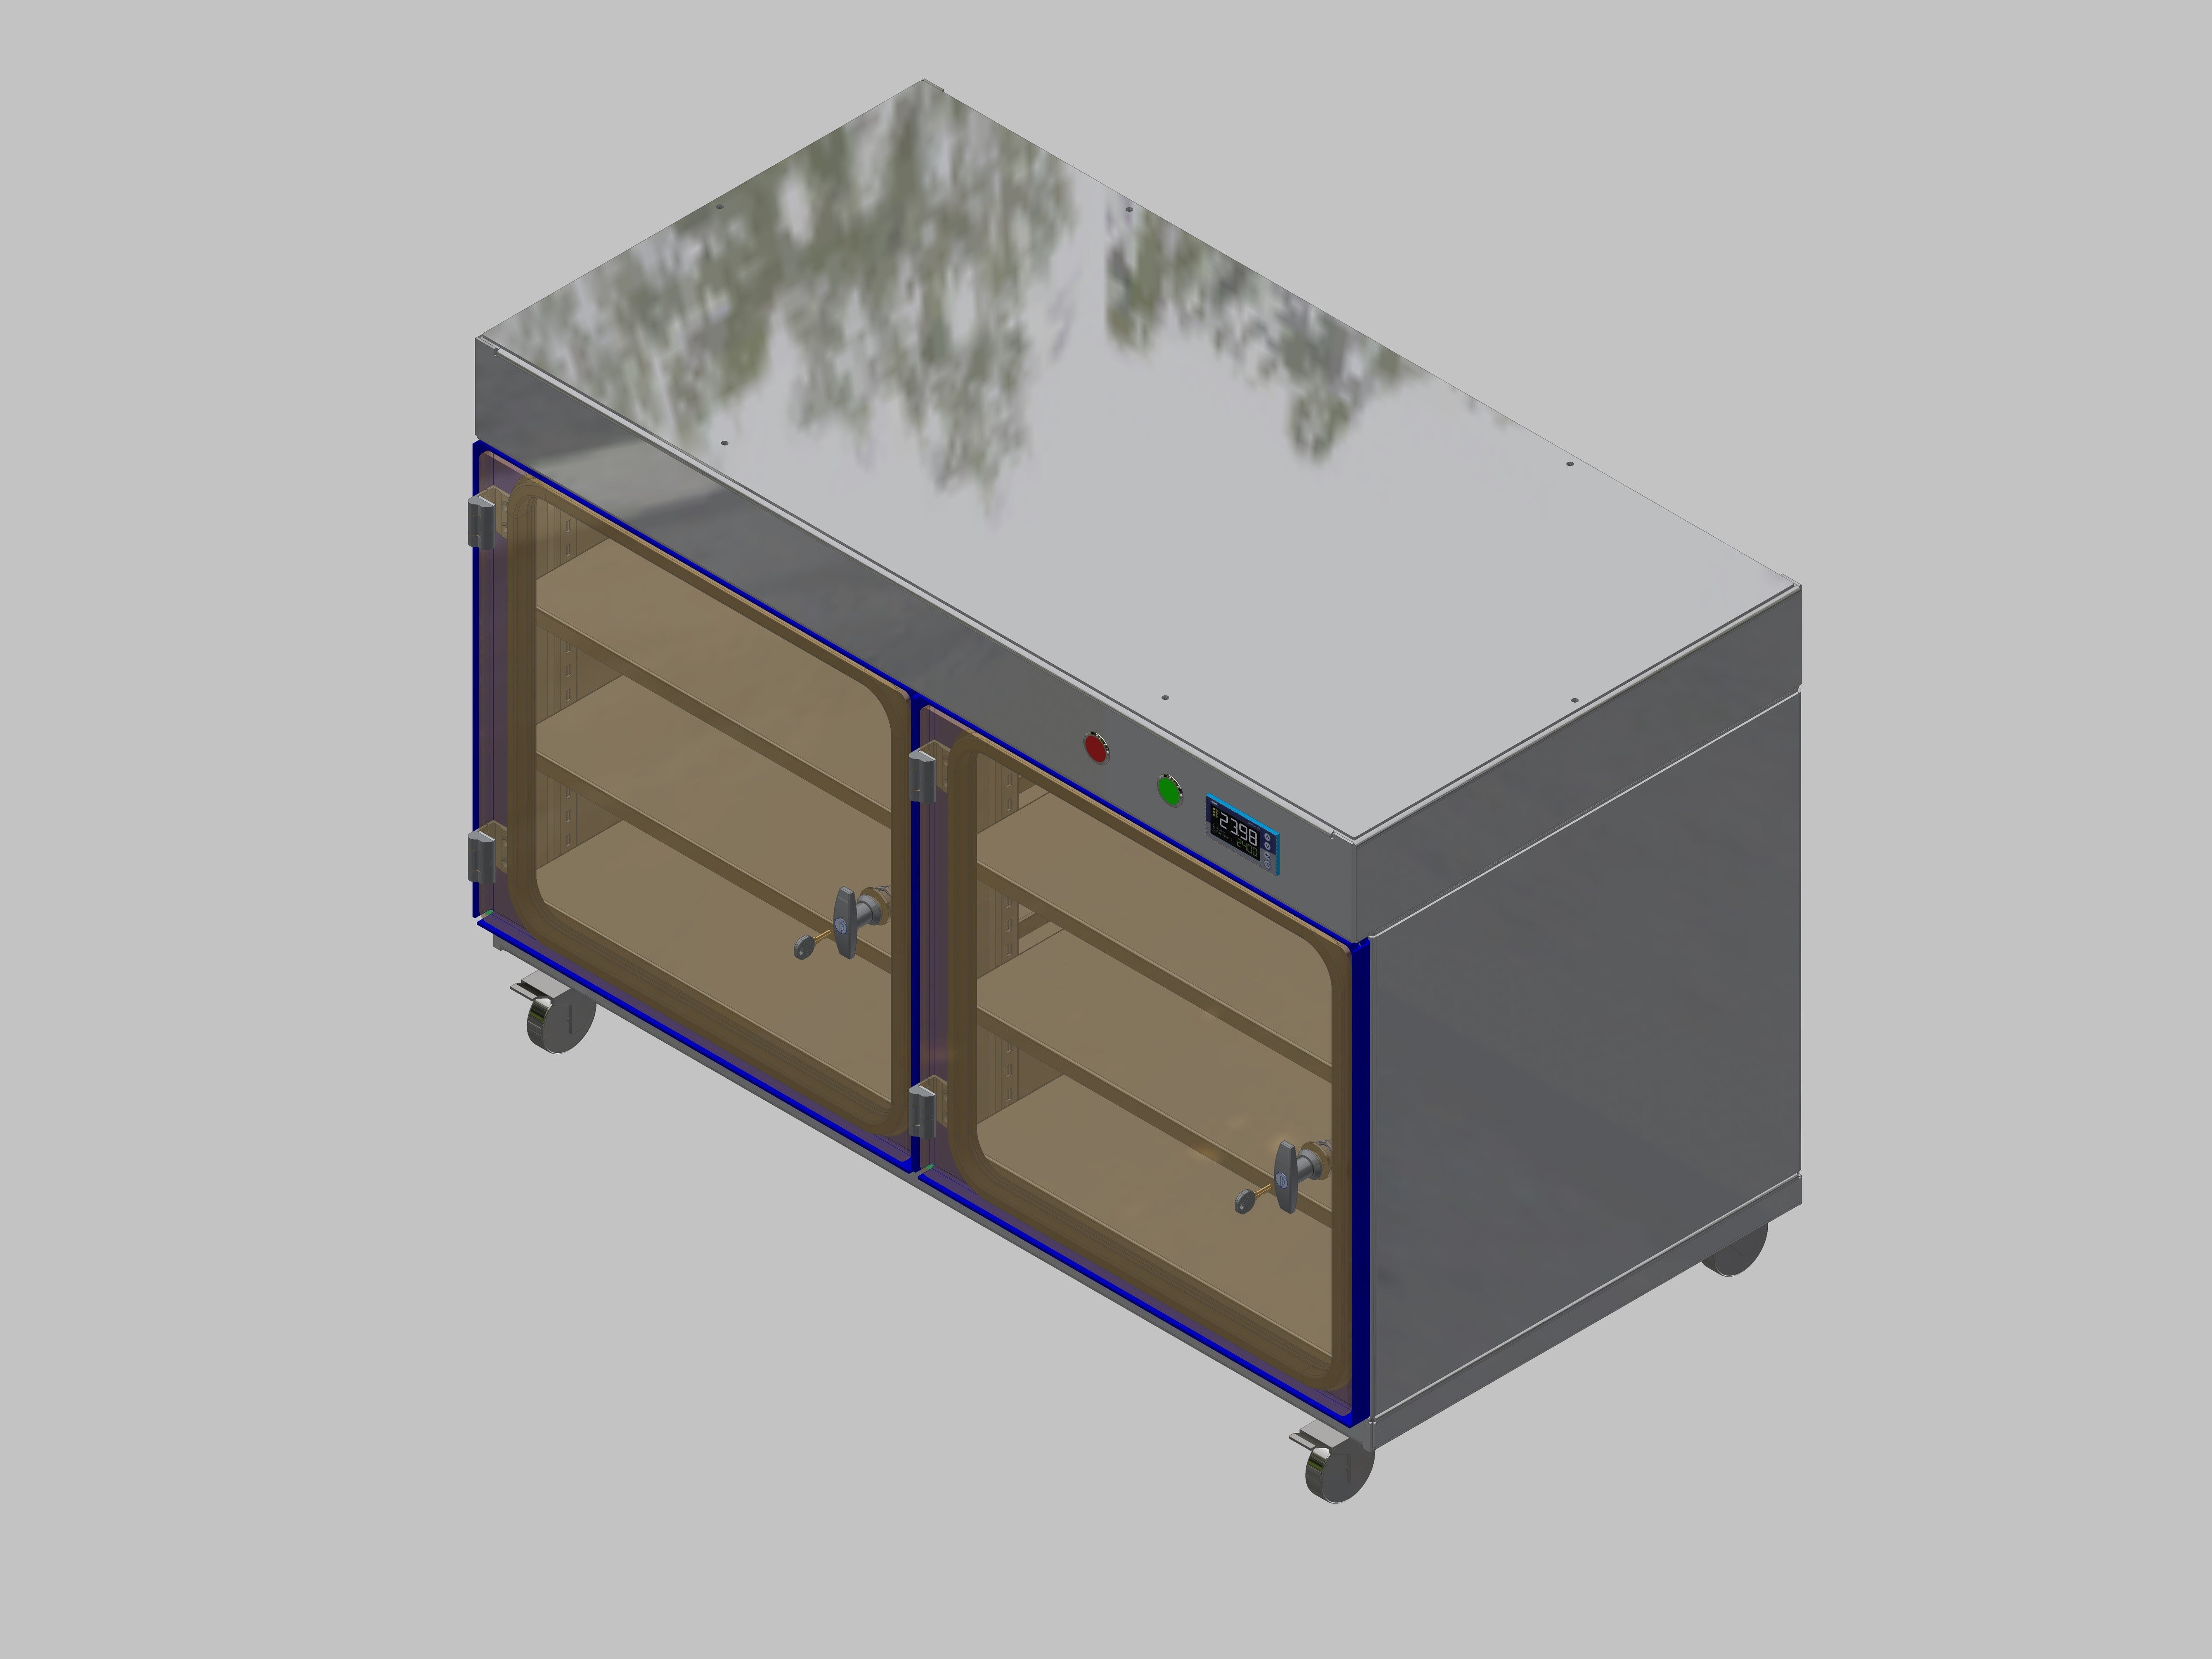 Dry storage cabinet-ITN-1200-2 with 3 shelves per compartment and base design with wheels